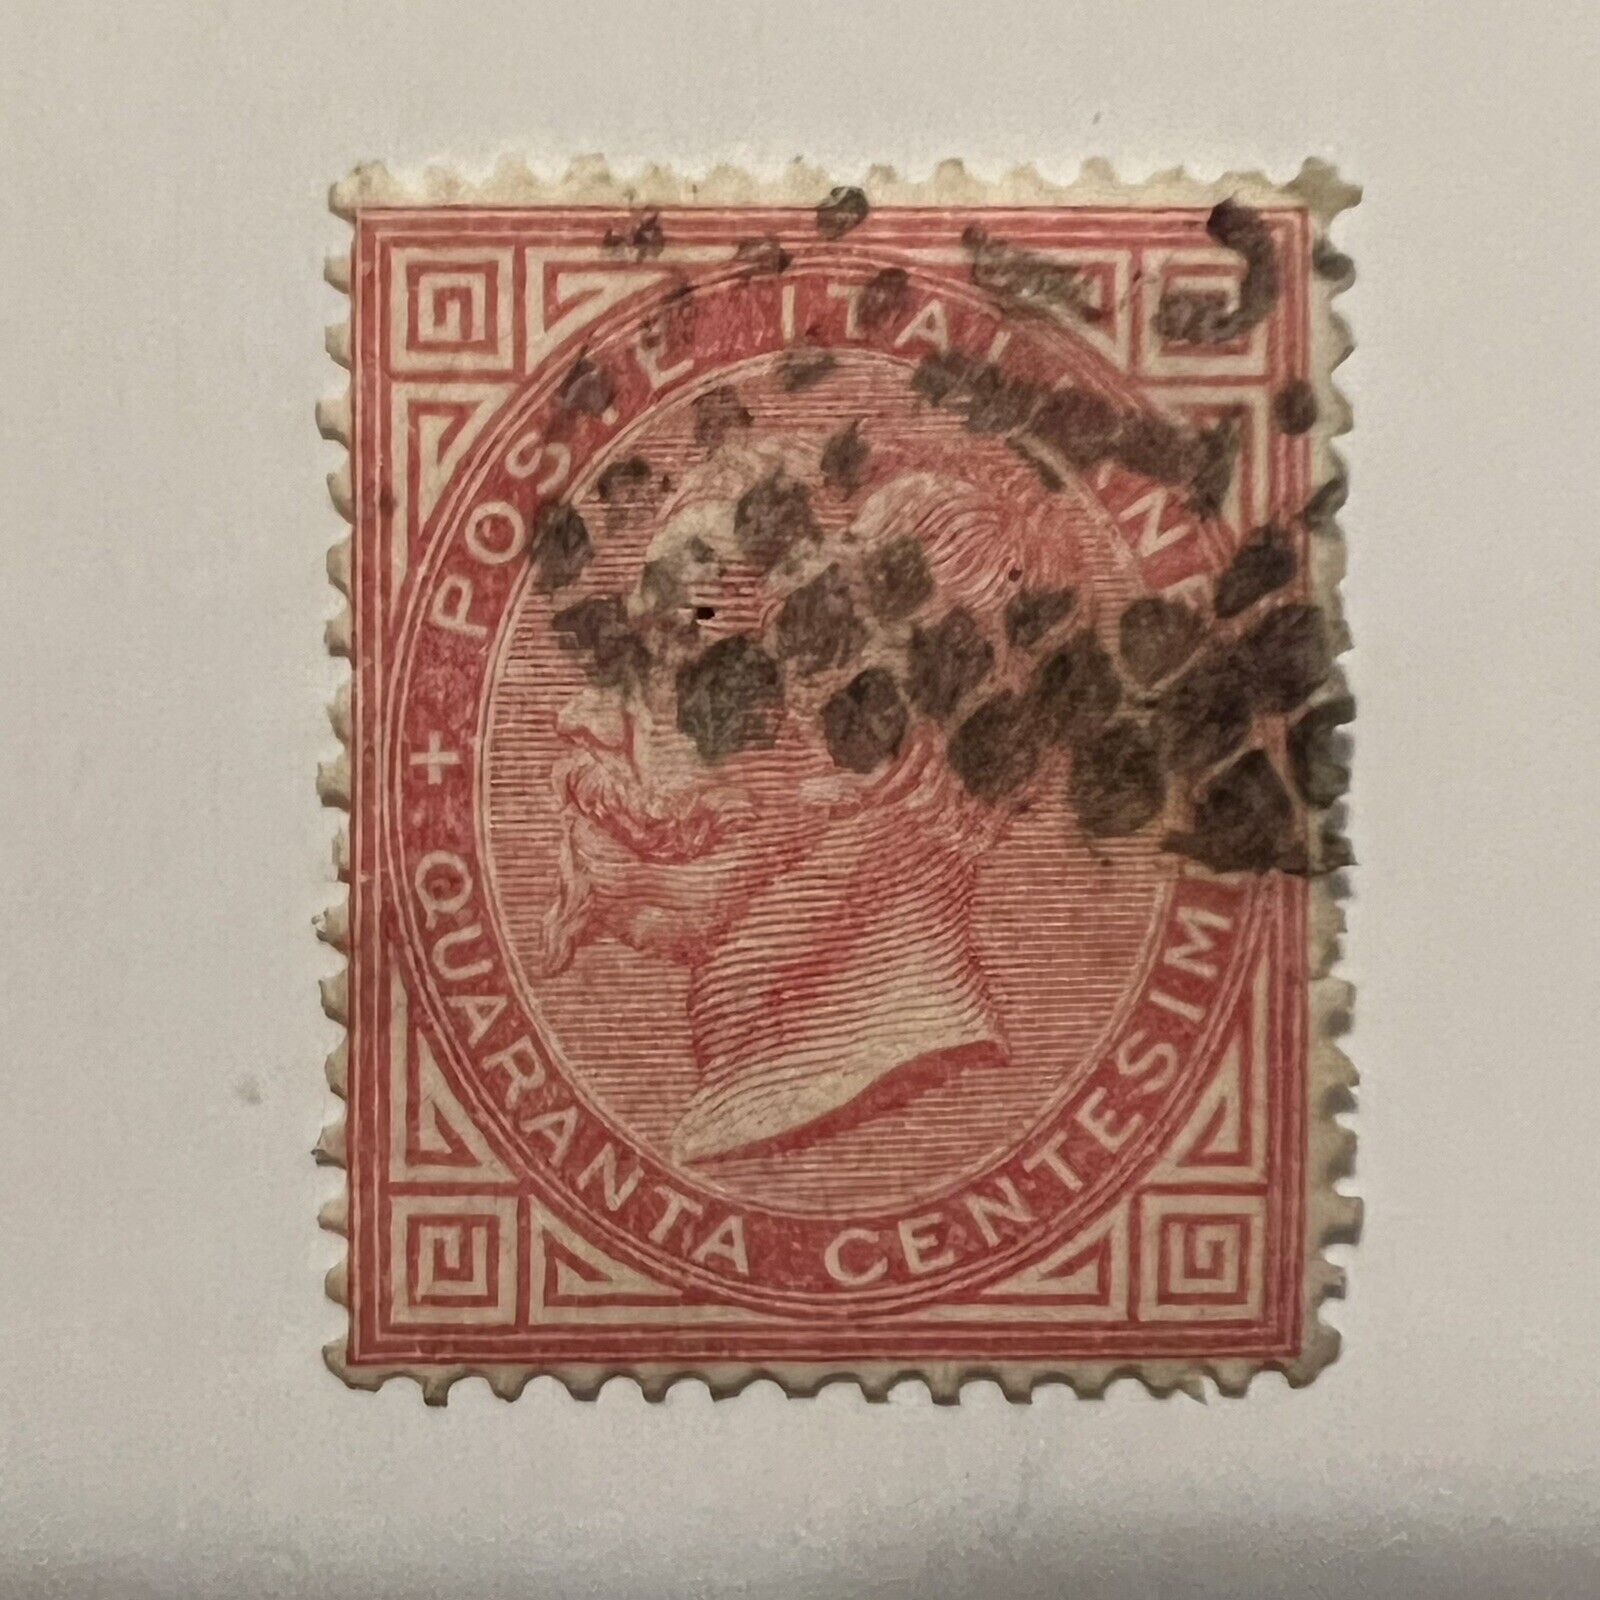 1863 ITALY 40C STAMP #31 WITH INTERESTING NUMBERED CANCEL